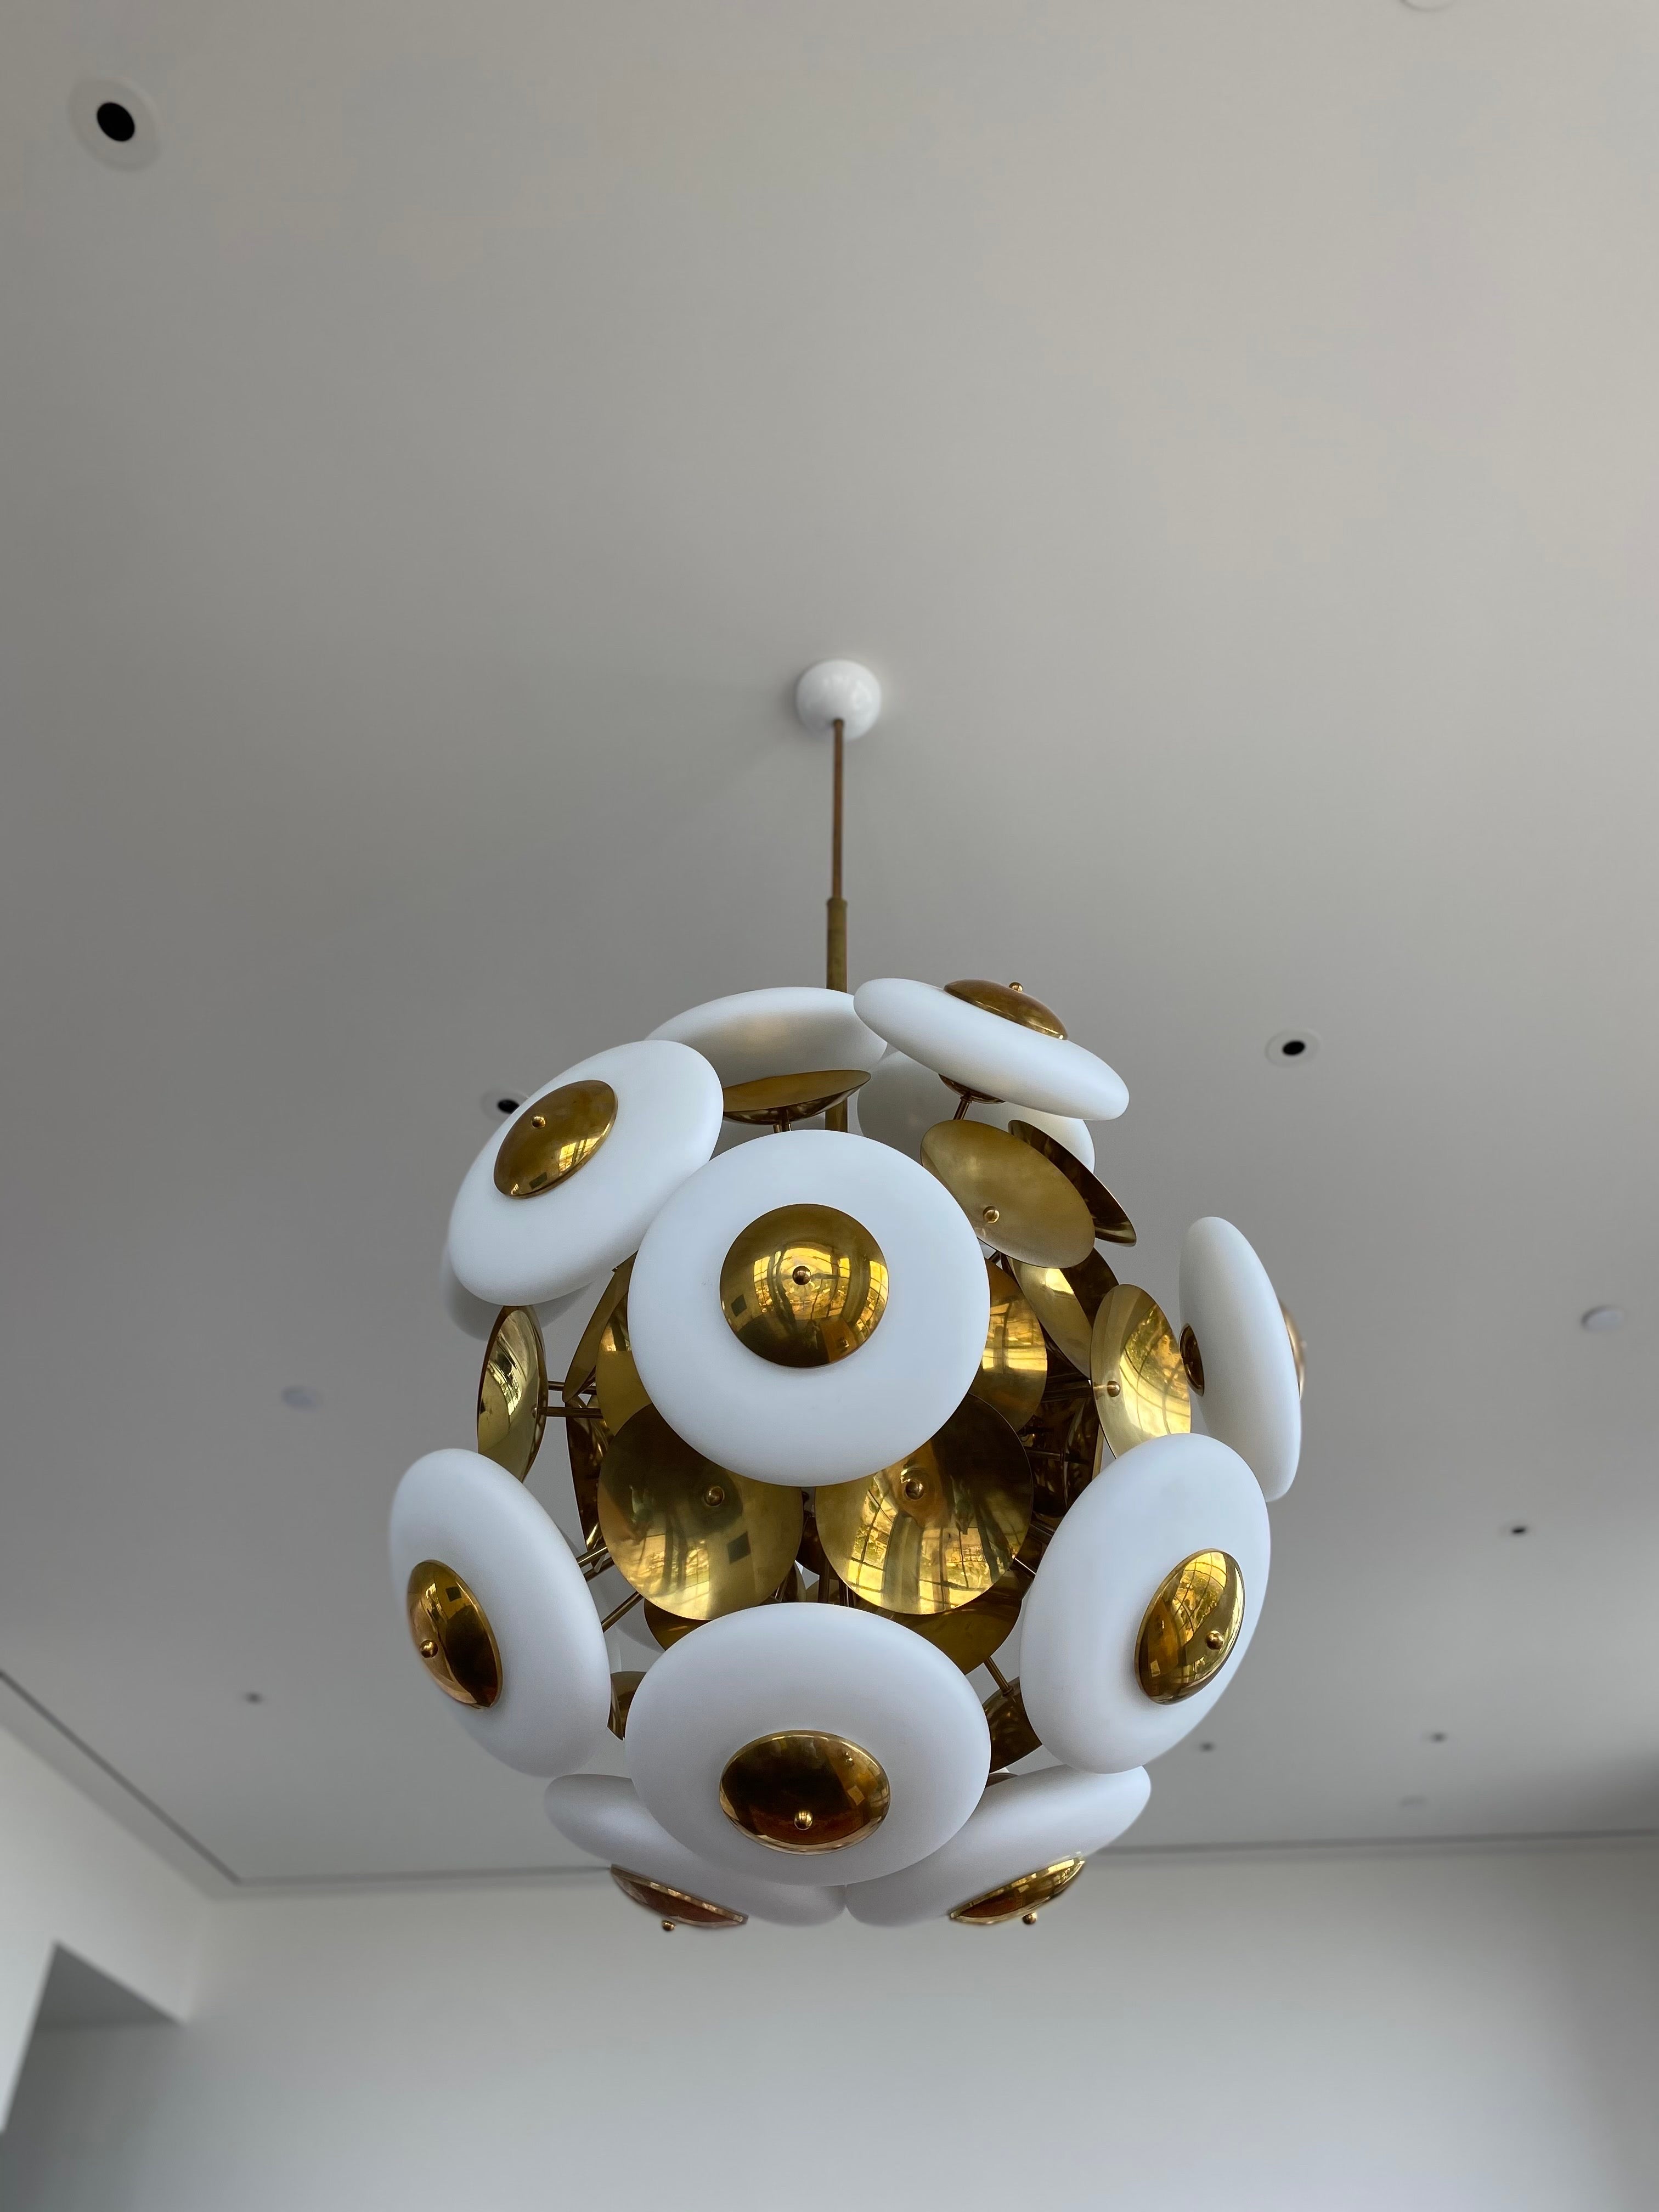 Impressive large Italian Cielo sputnik chandeliers are sold separately but can be sold as a pair. Discs consist of a matte white finish, and are made of Murano glass on a brass frame and brass discs that hold the Murano glass. The Murano glass can